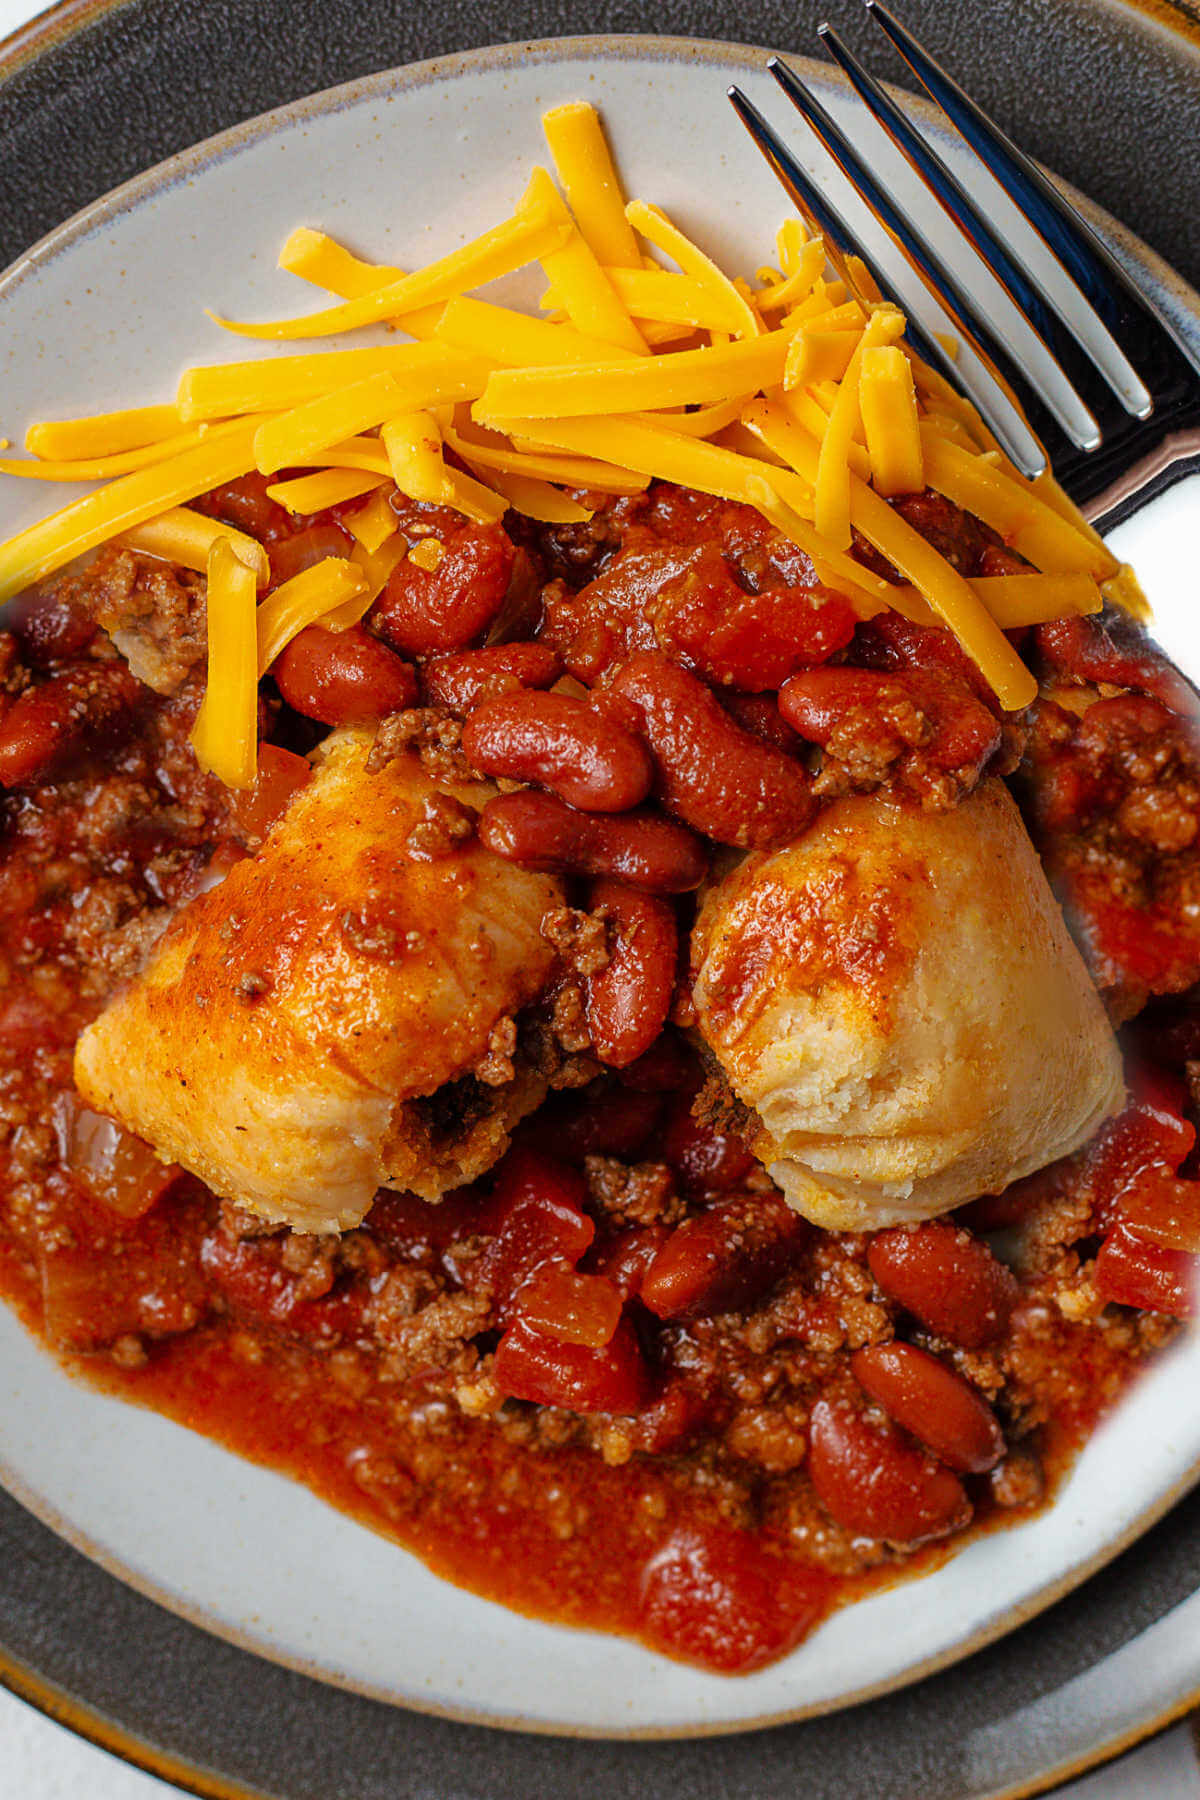 southern style hot tamales on a plate smothered with chili and cheese.